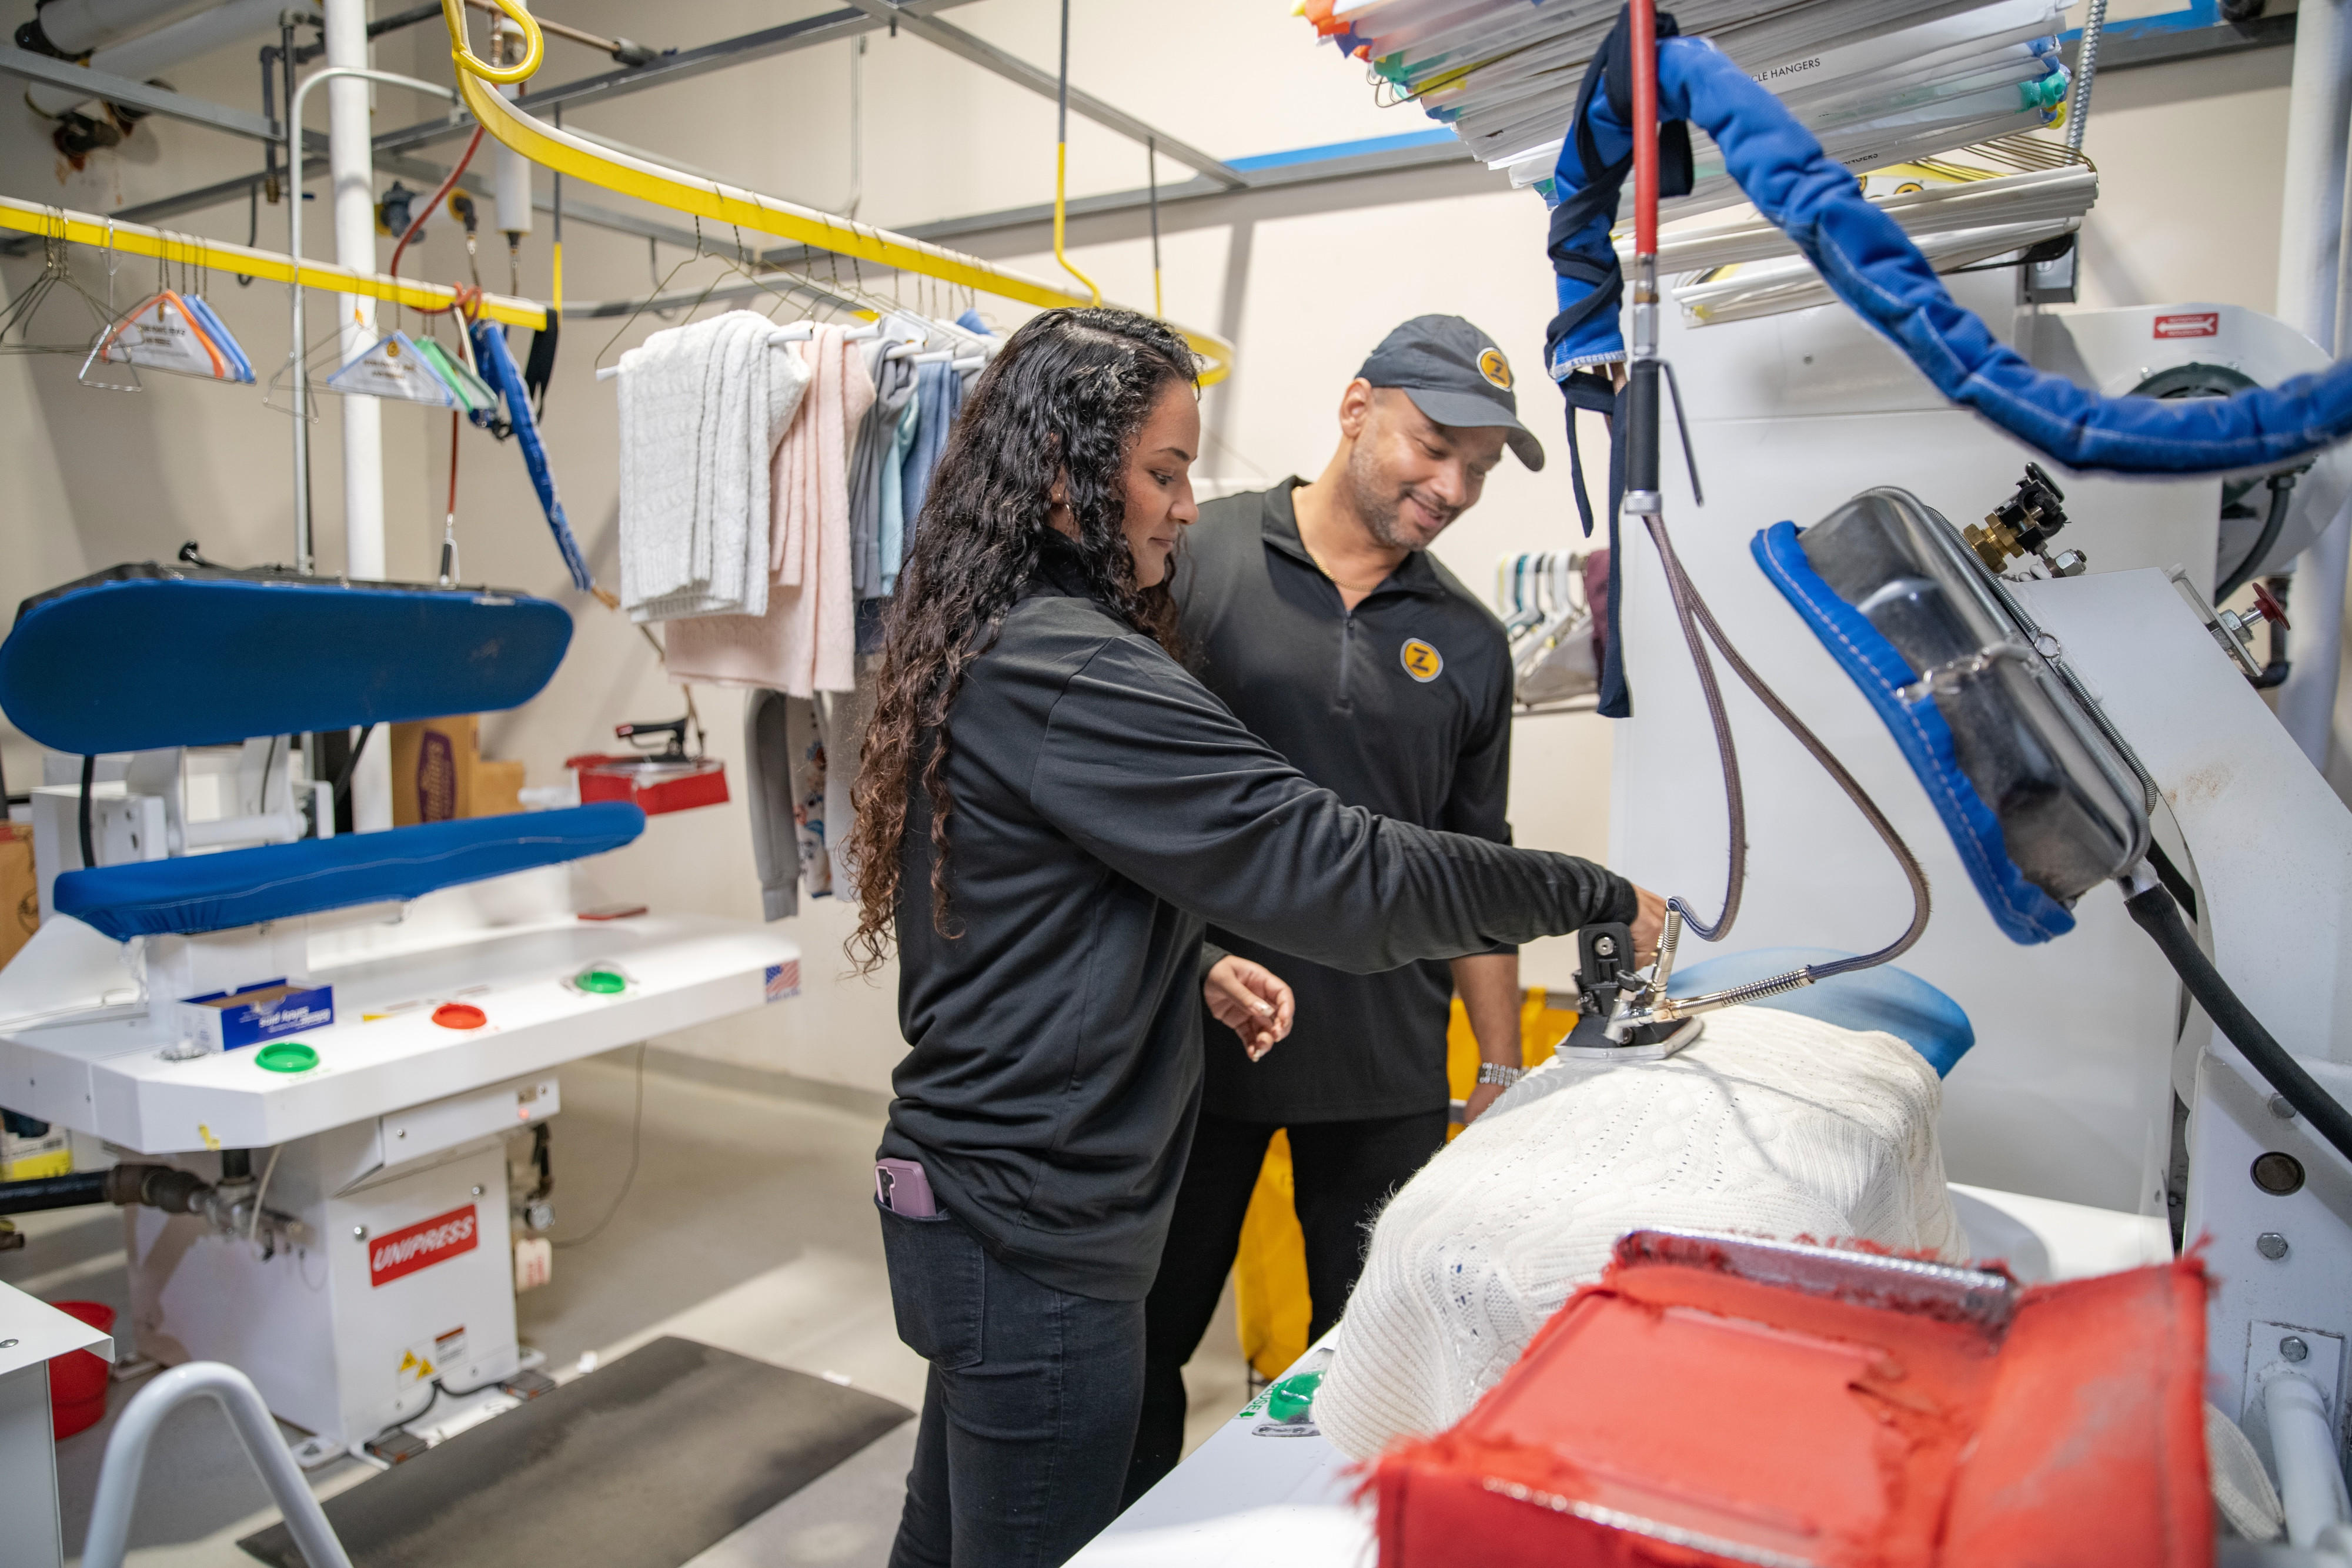 ZIPS Cleaners owners and managers take a hand-on approach to making sure our store team members are thoroughly trained on all our specialized pressing equipment.